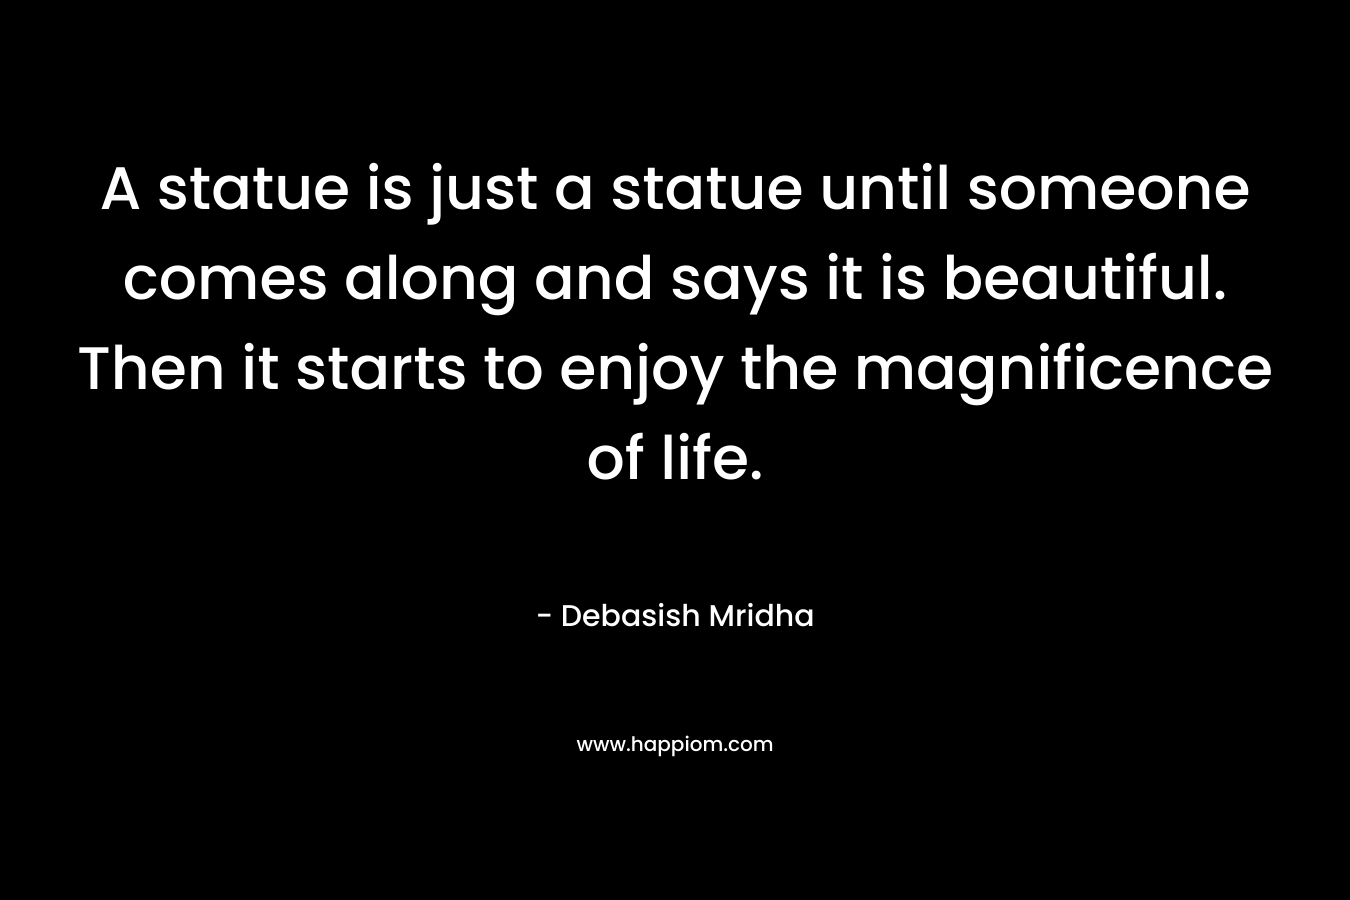 A statue is just a statue until someone comes along and says it is beautiful. Then it starts to enjoy the magnificence of life. – Debasish Mridha